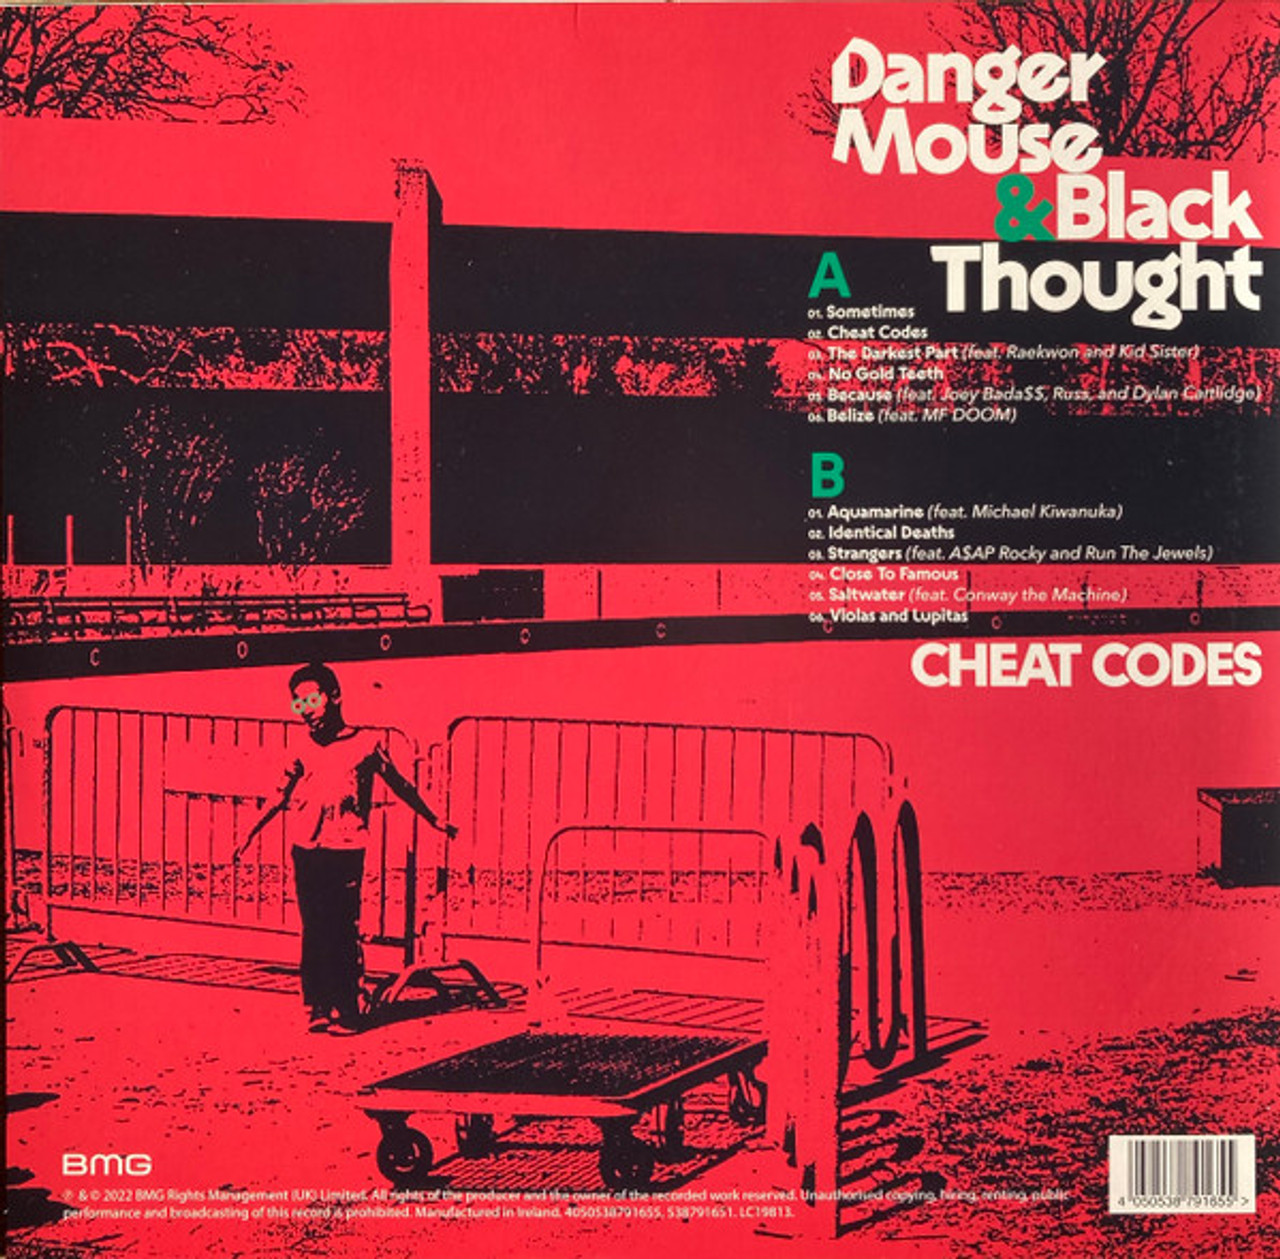 Cheat Codes - Danger Mouse & Black Thought (#4050538791655 